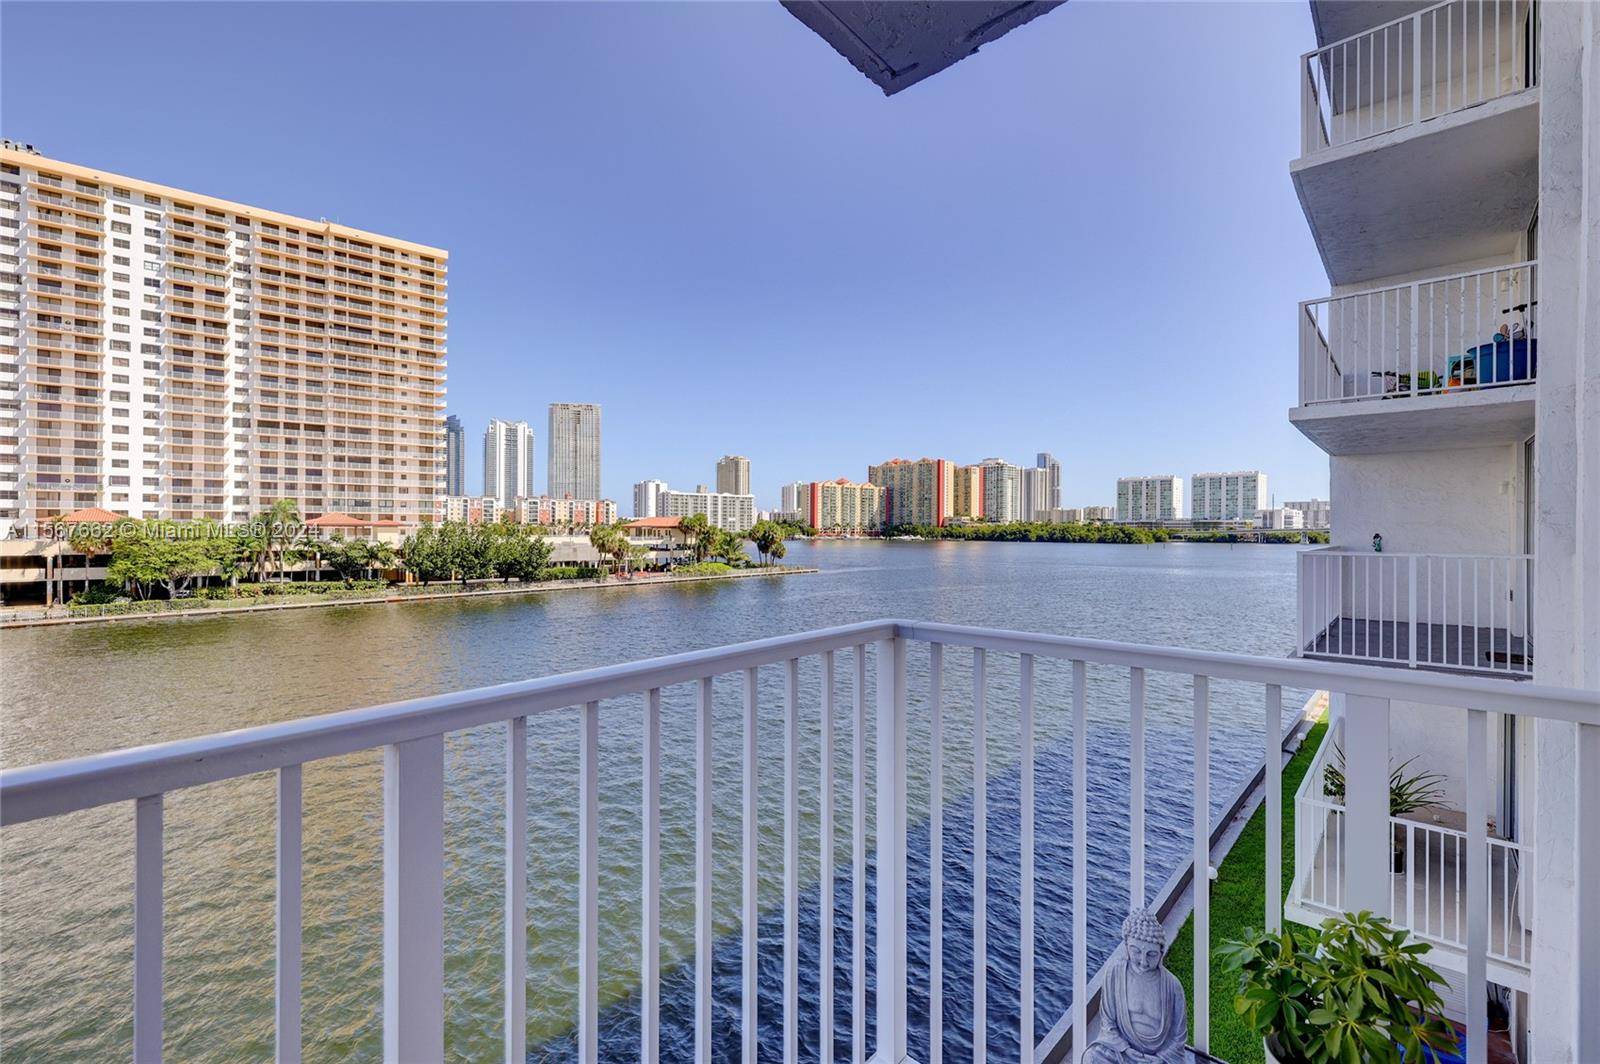 LOOK NO FURTHER ! FANTASTIC, WATERFRONT CONDO IN EASTERN SHORES, ONE BEDROOM, ONE AND A HALF BATH LOCATED IN GATED COMMUNITY.